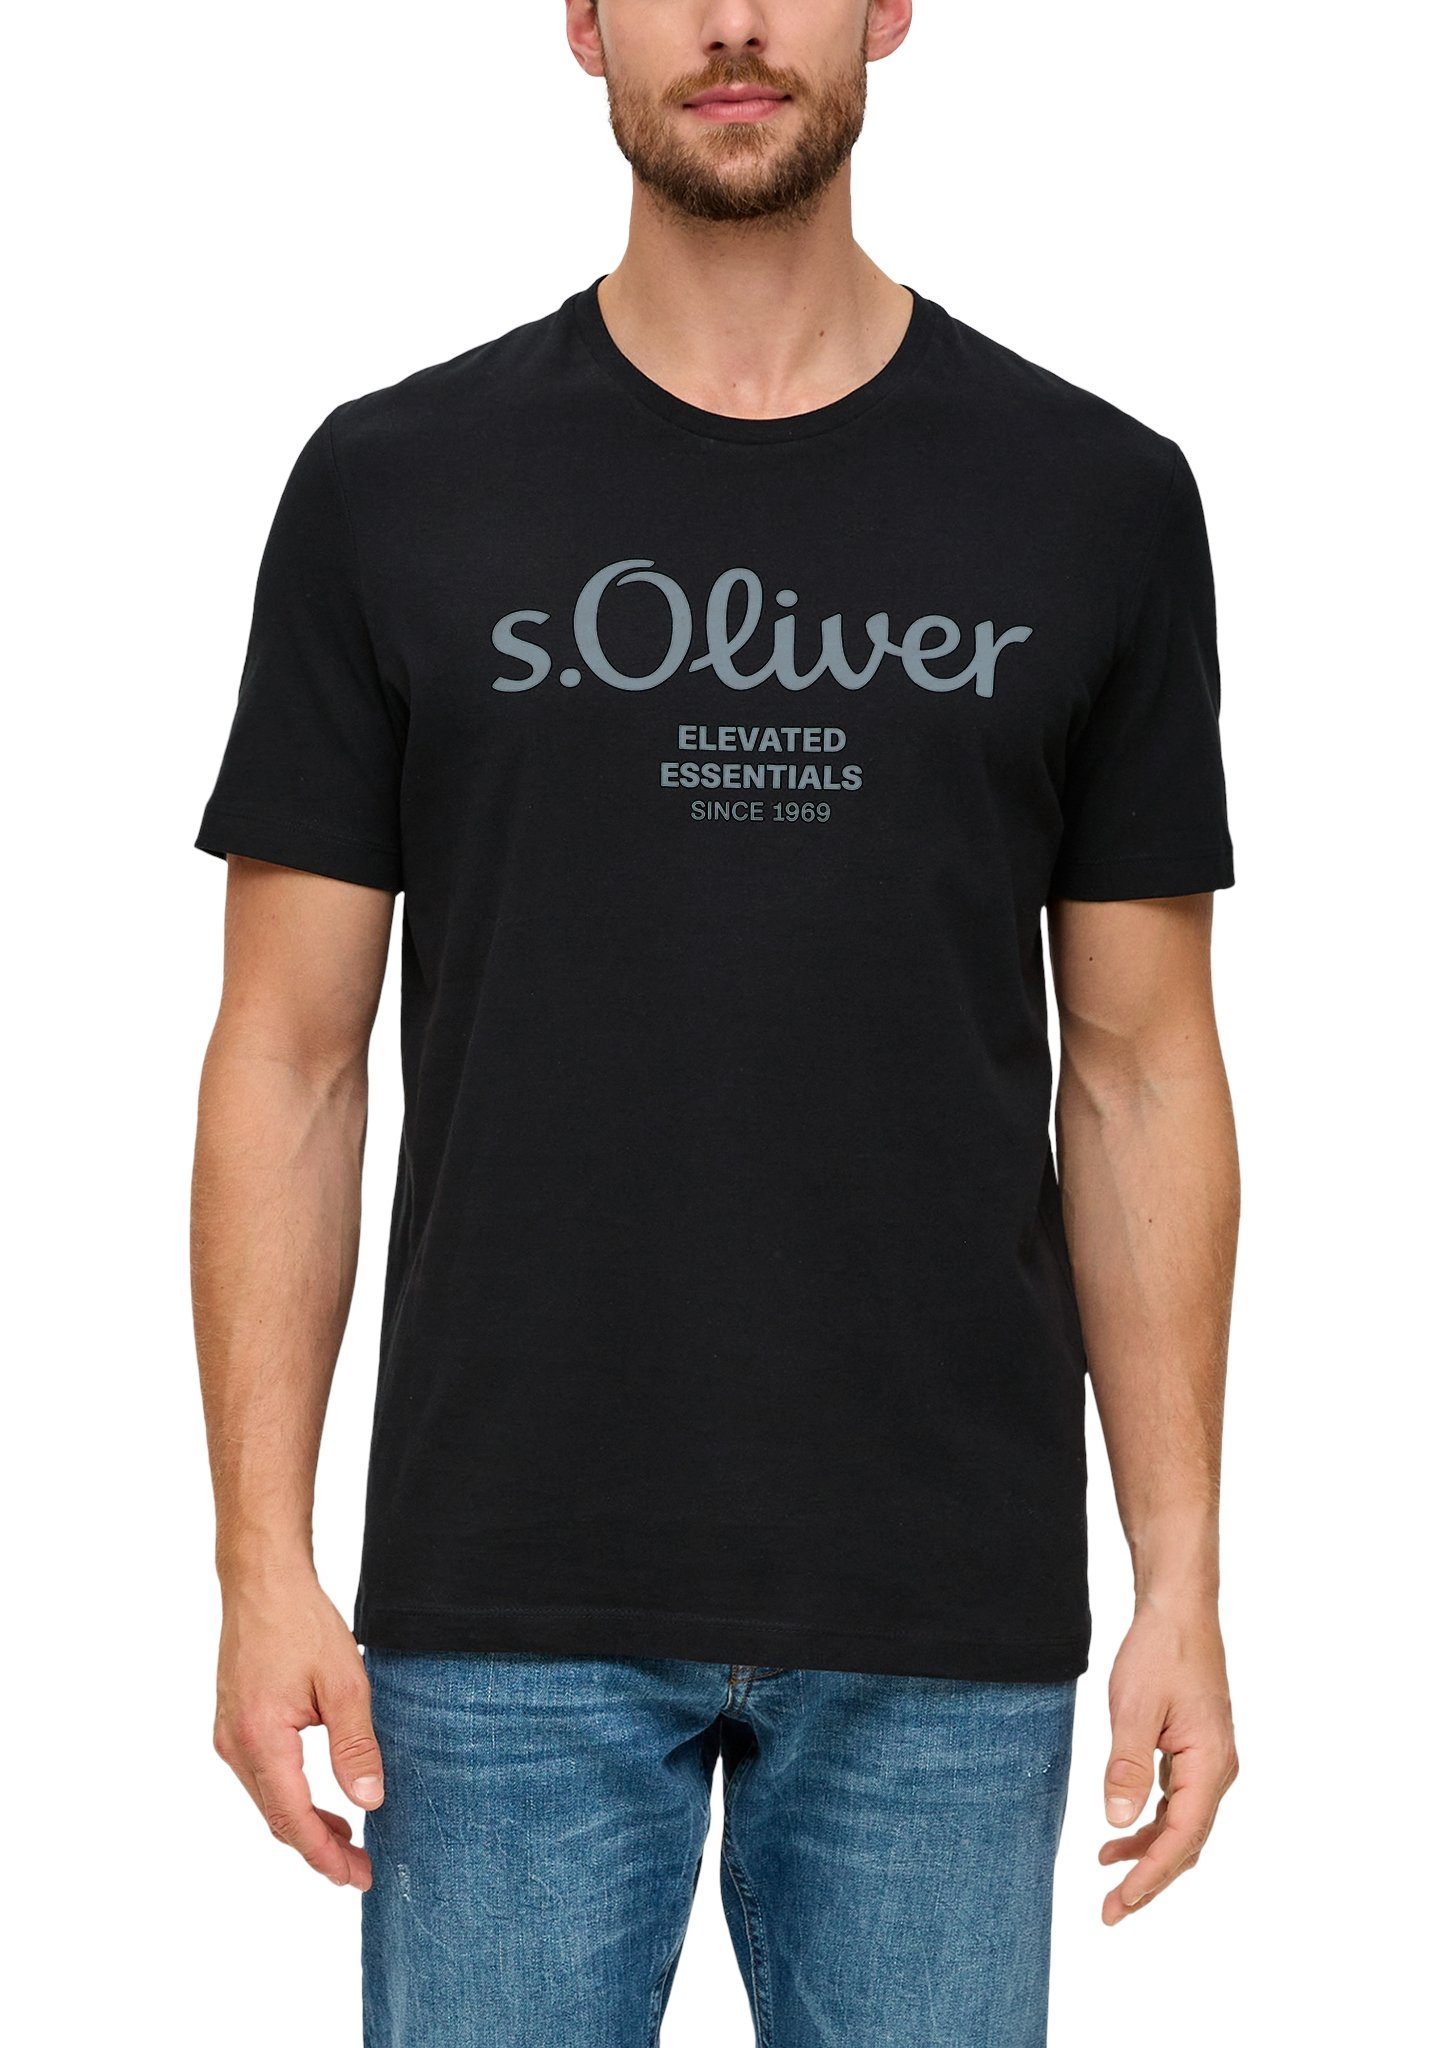 s.Oliver T-Shirt im sportiven black Look